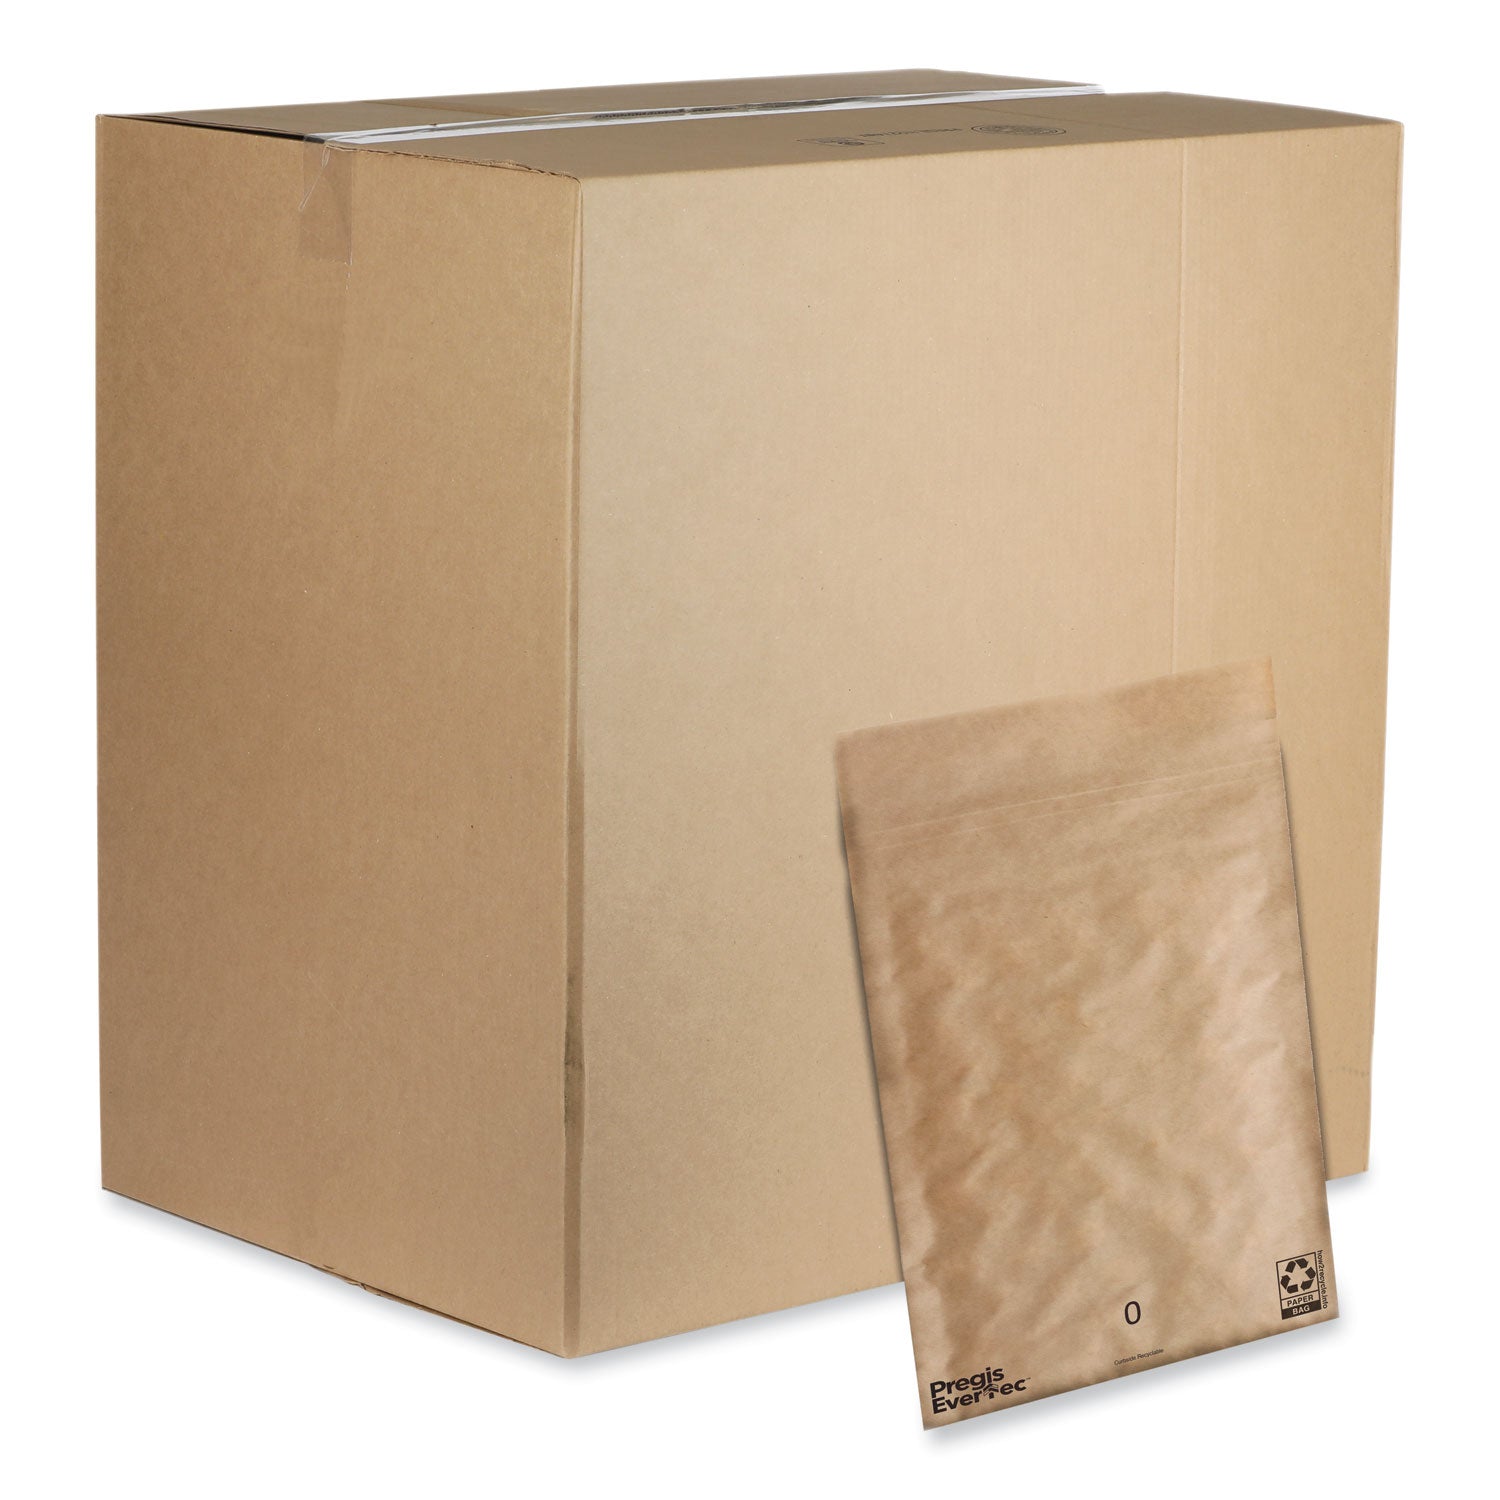 evertec-curbside-recyclable-padded-mailer-#0-kraft-paper-self-adhesive-closure-7-x-9-brown-300-carton_pgs4083813 - 1